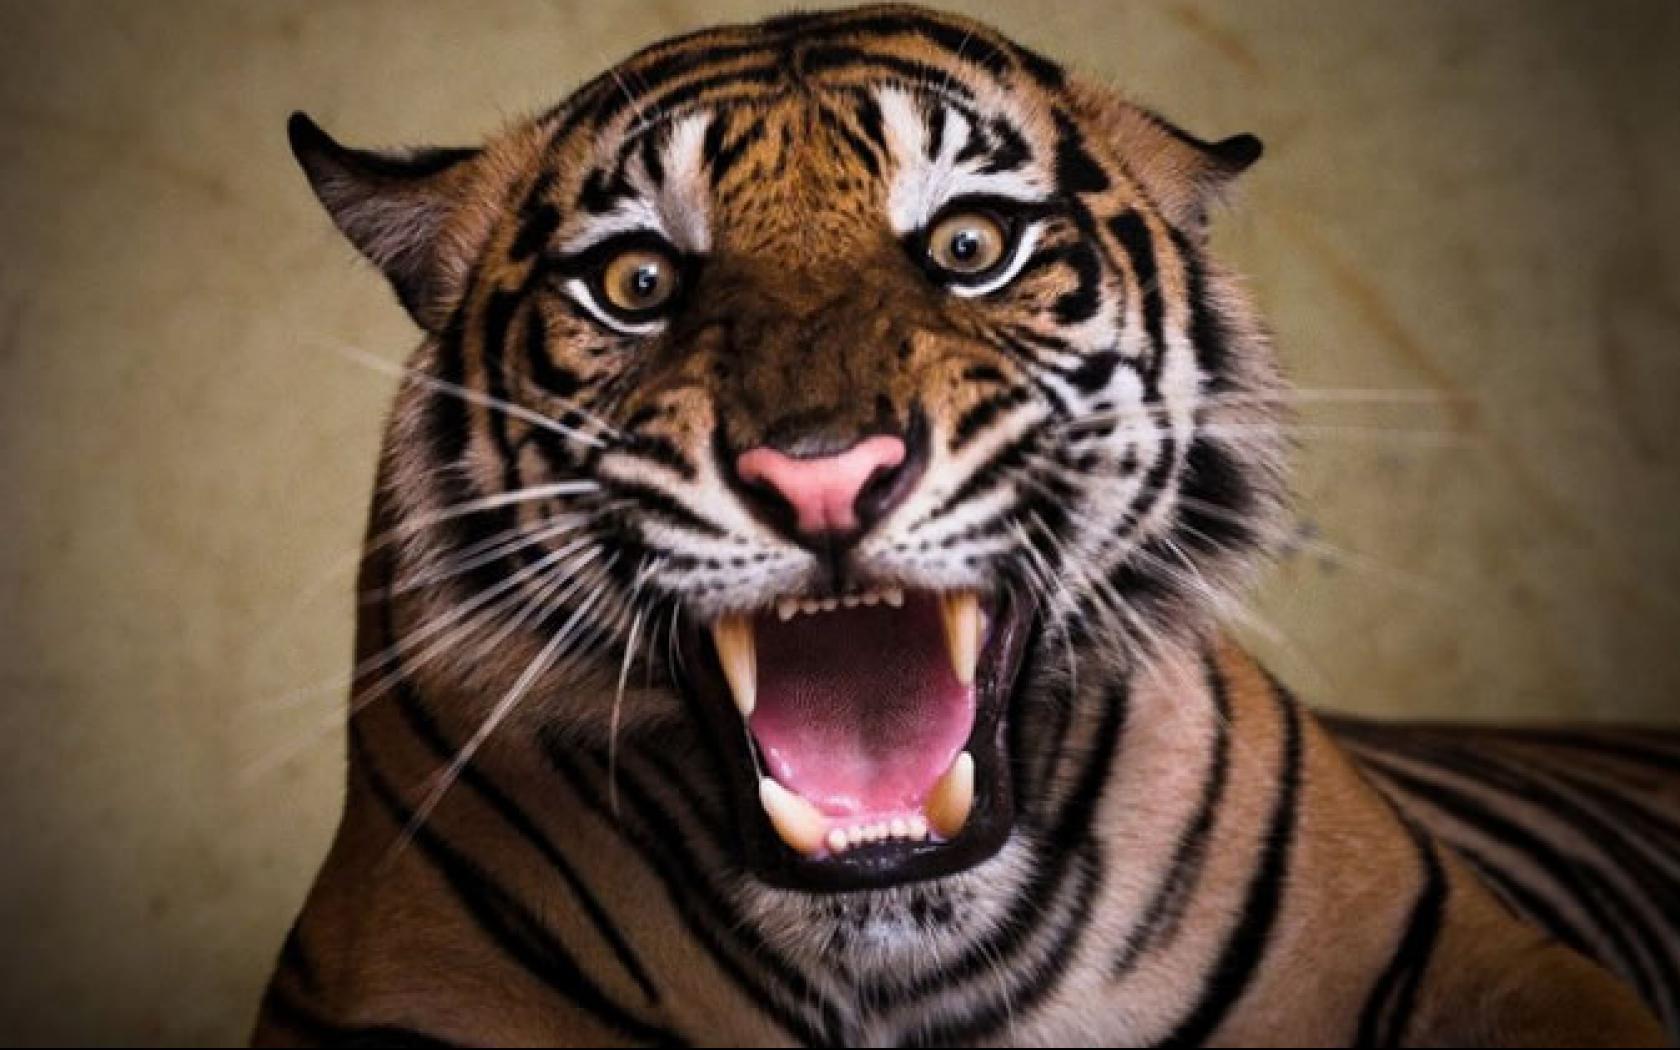 Angry Tigers Image Wallpaper